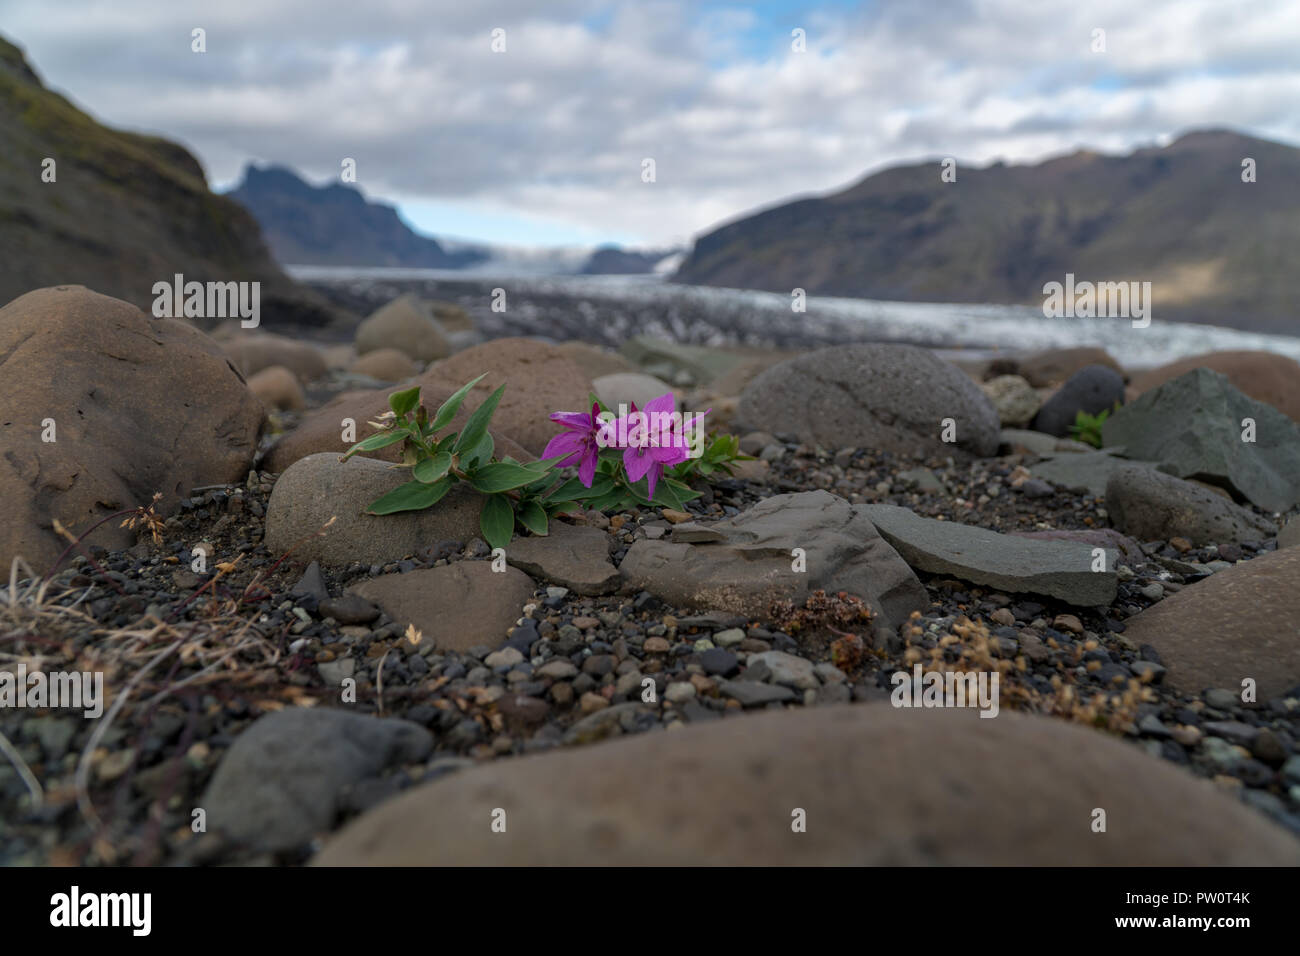 Small colorful flower is growing on rough surface in Iceland during summer time Stock Photo